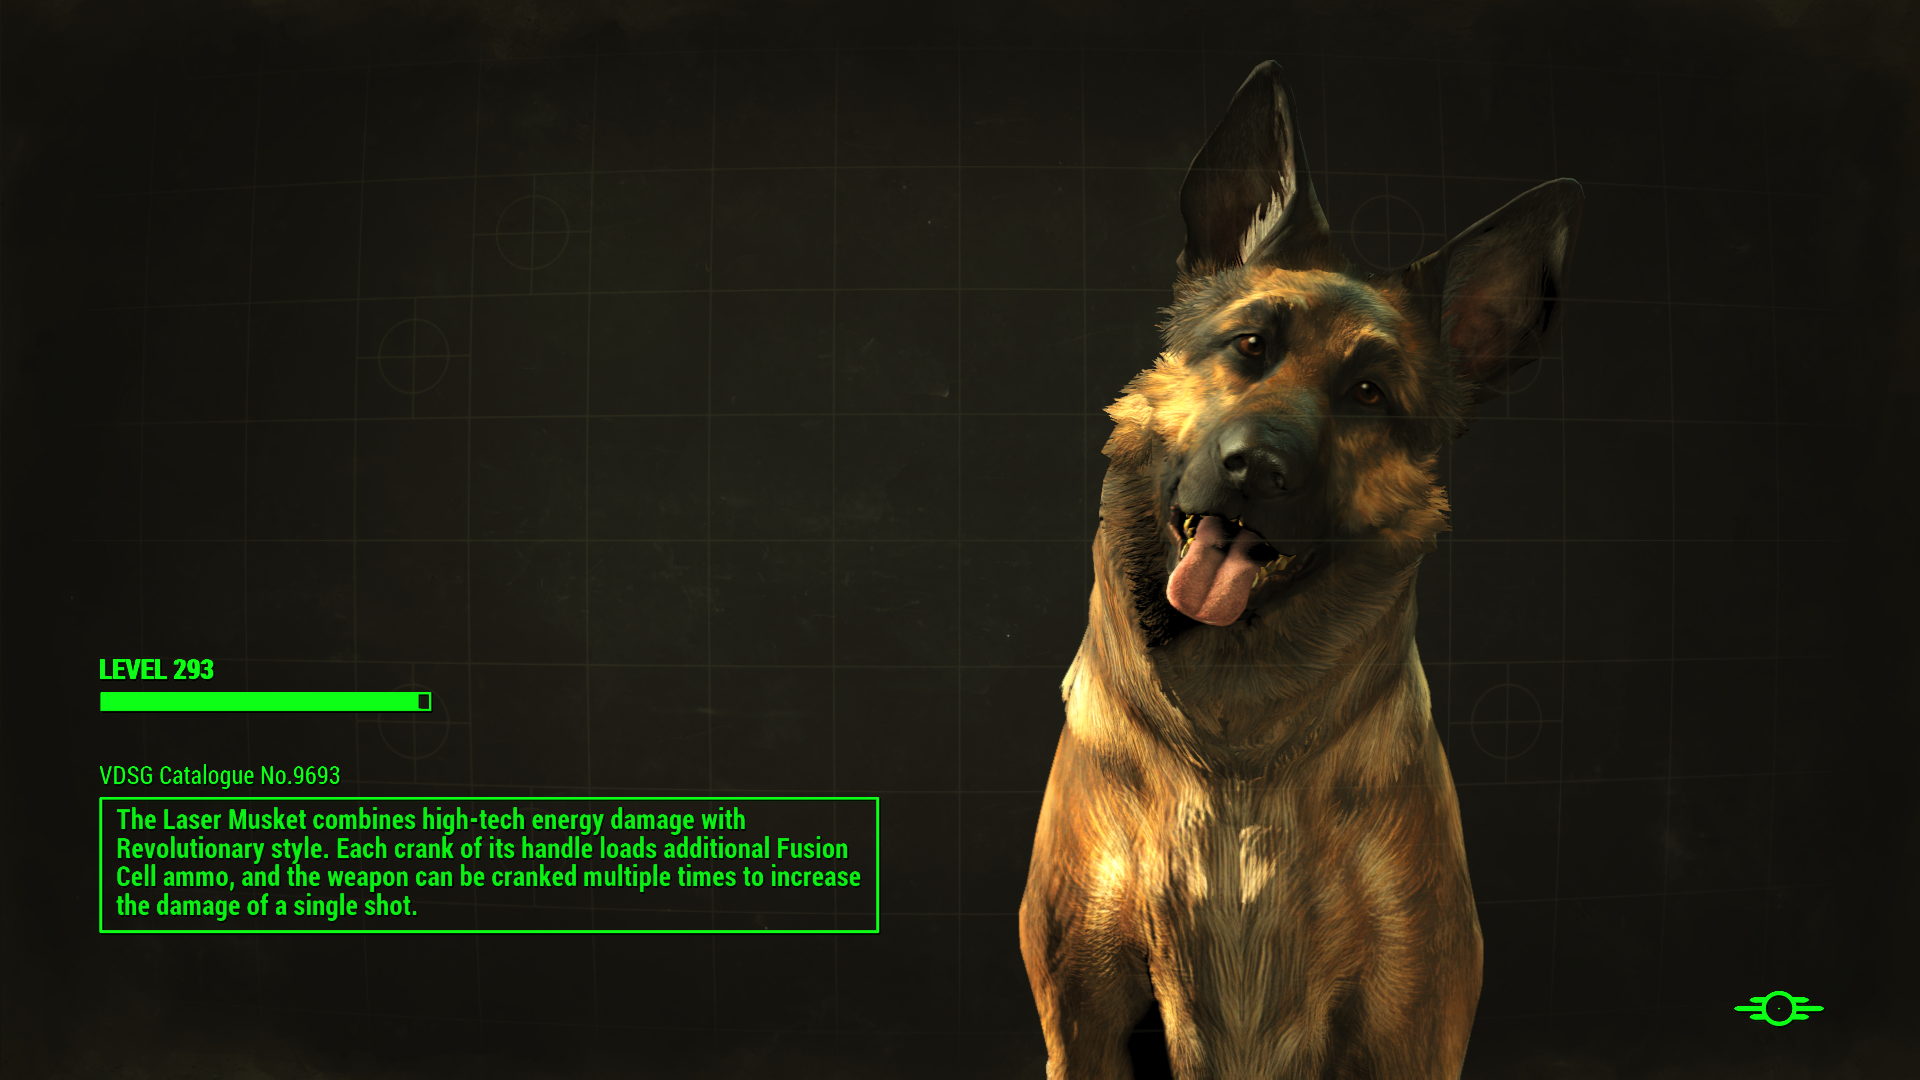 fallout 3 dogmeat location